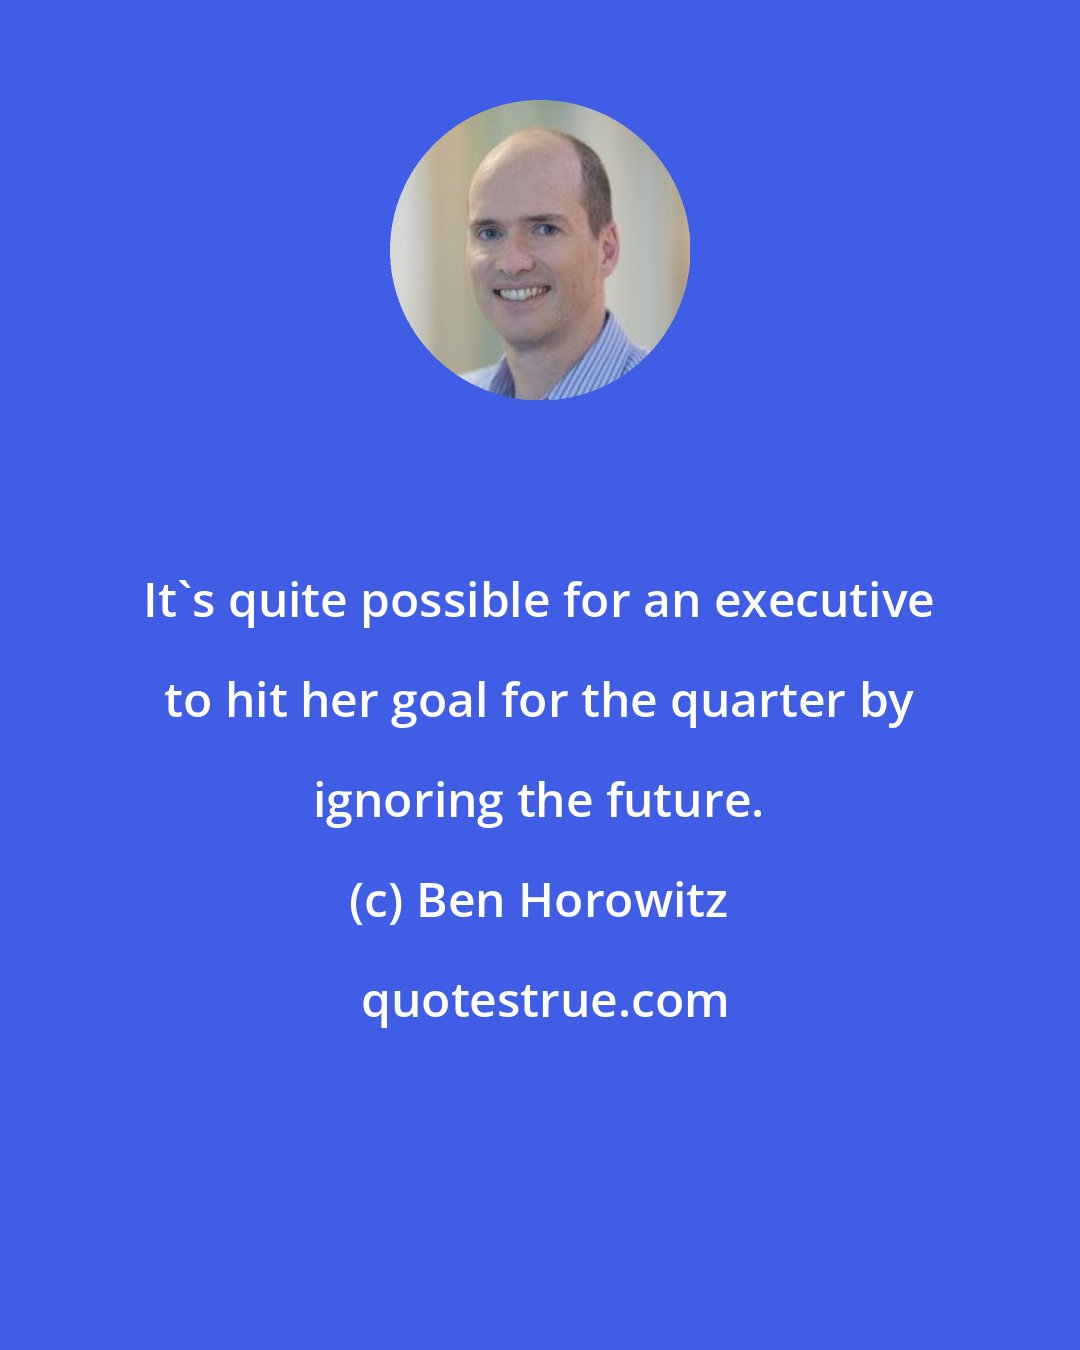 Ben Horowitz: It's quite possible for an executive to hit her goal for the quarter by ignoring the future.